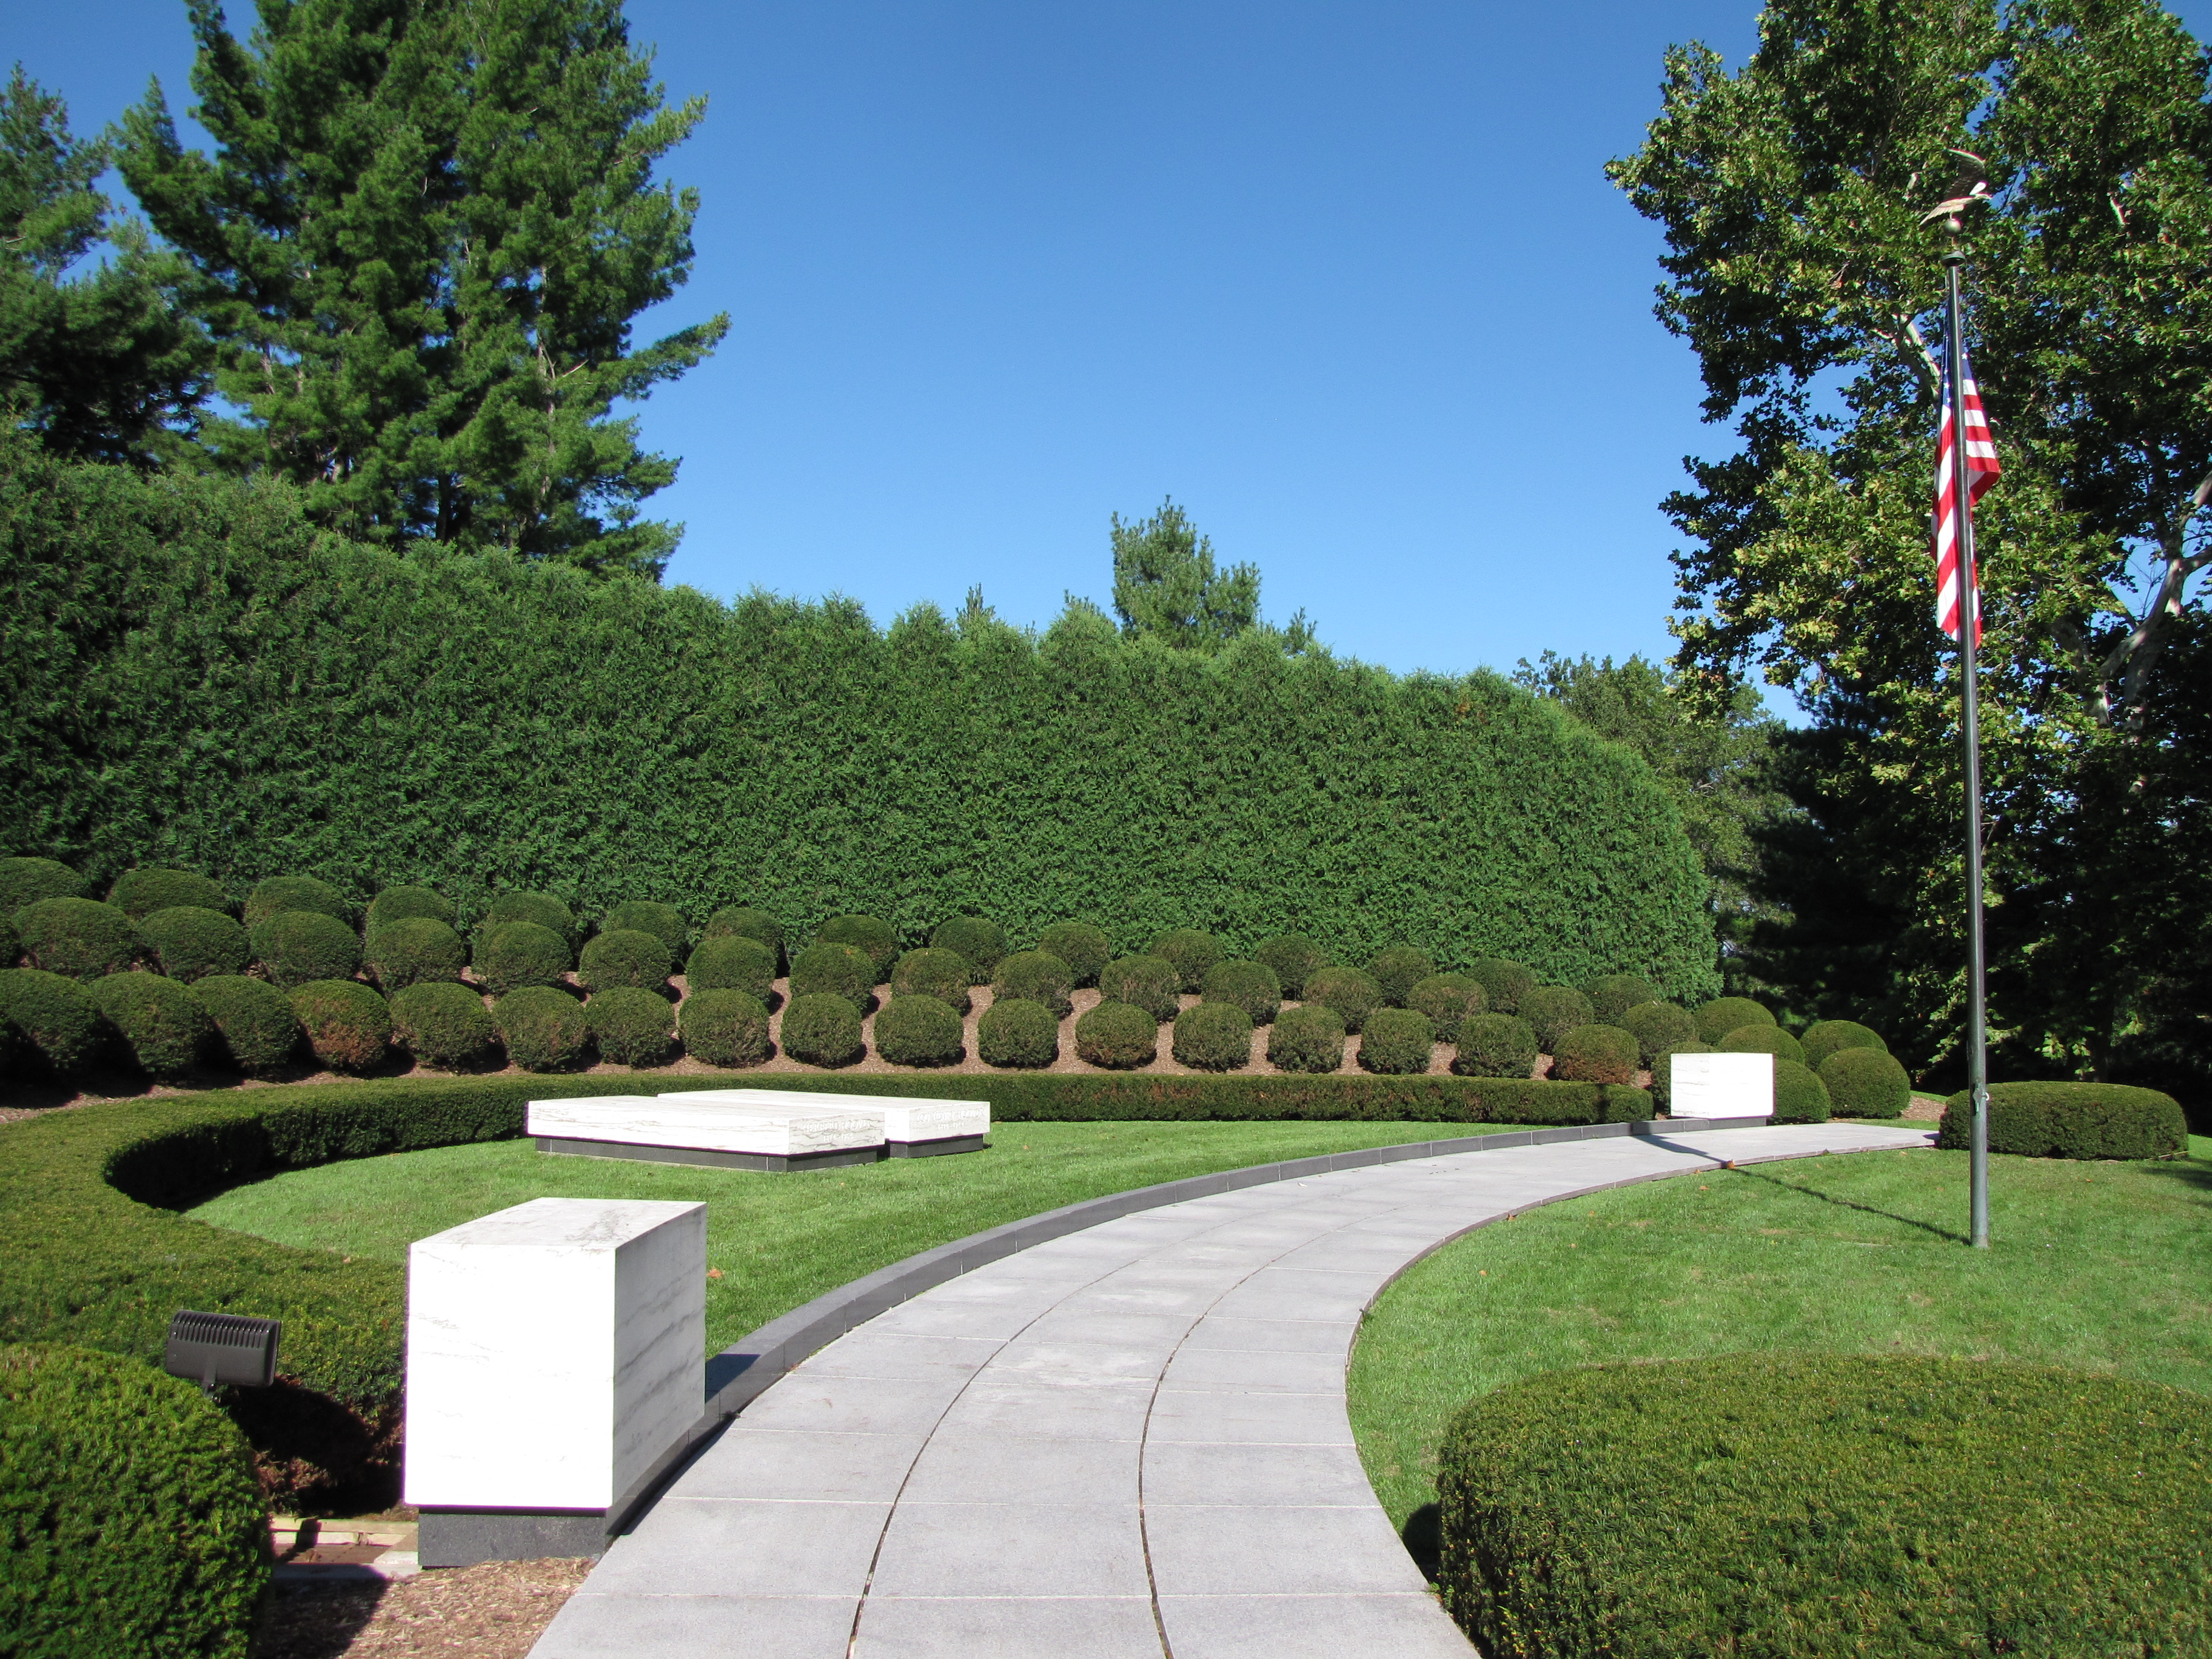 Two marble ledger stones each mark a grave in a semicircular landscaped plot with a flagpole.